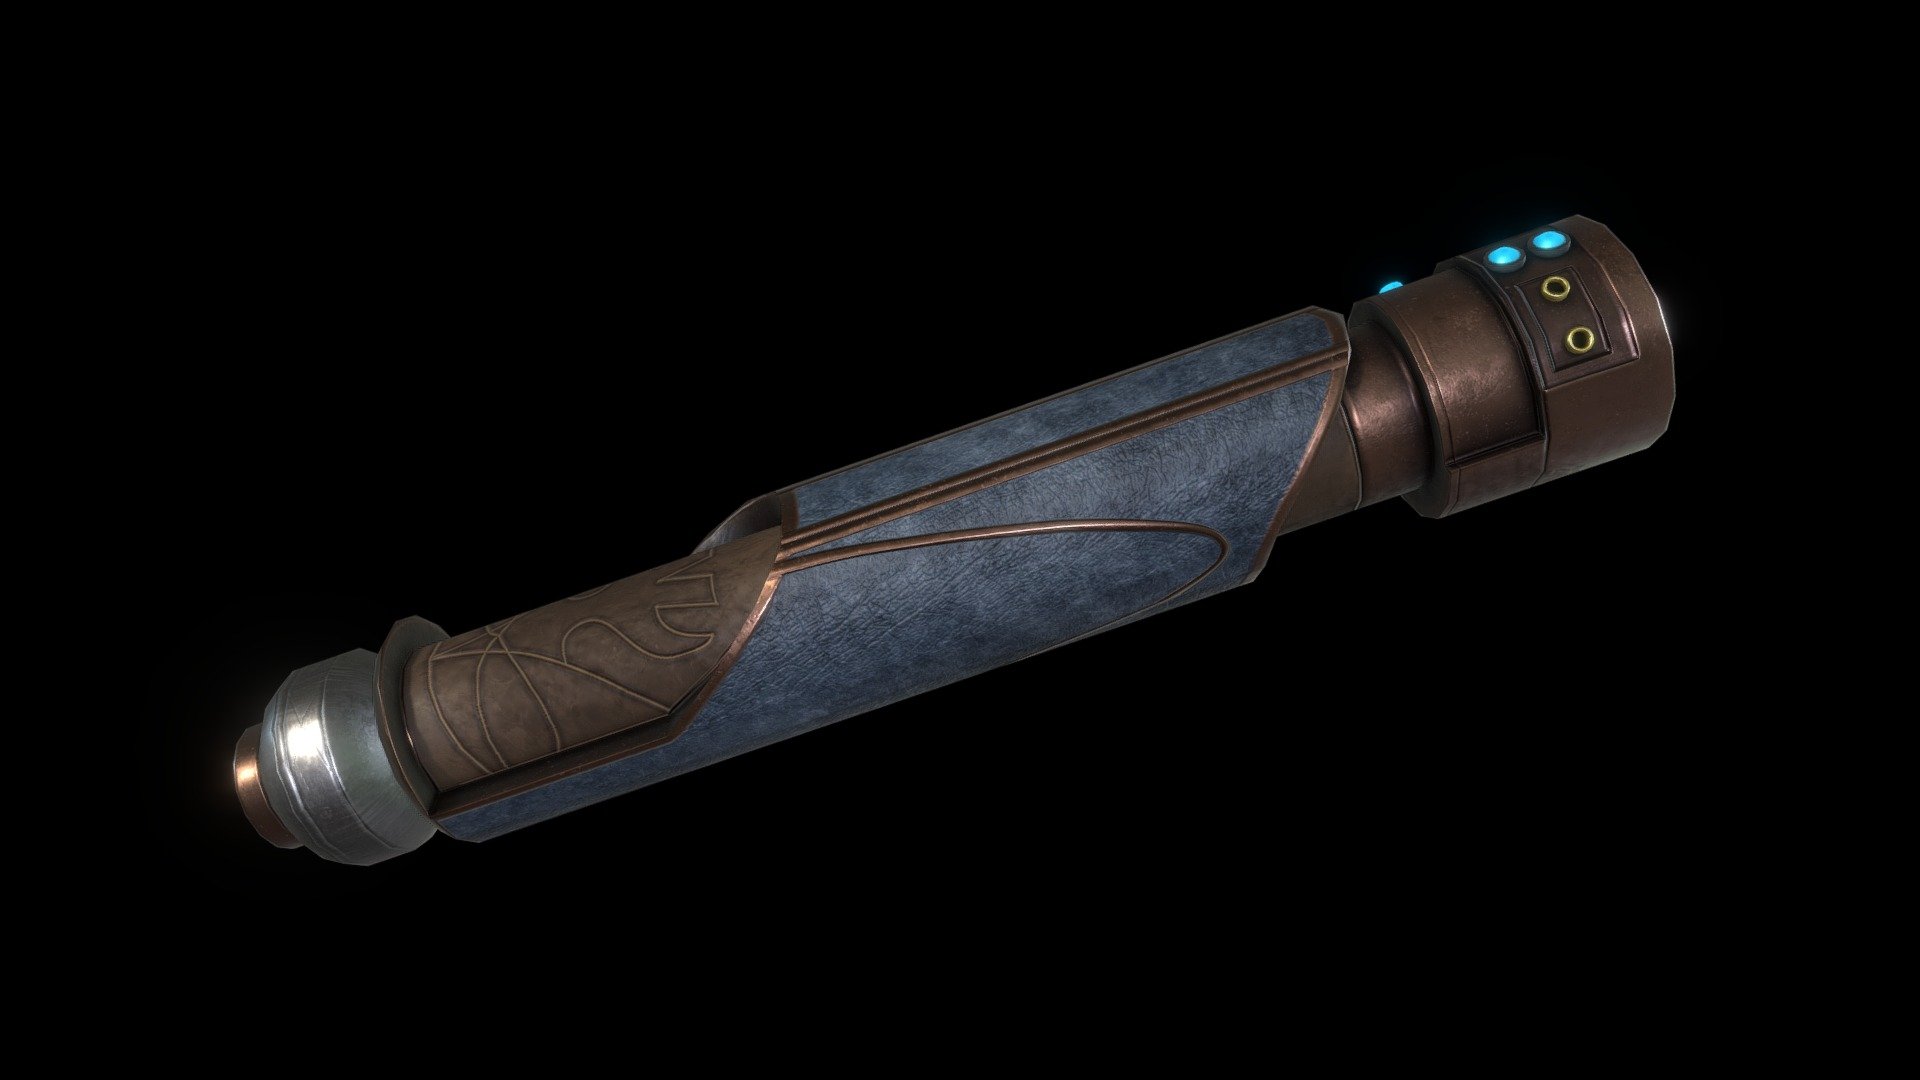 Remake of the third single lightsaber from the classic Star Wars Jedi Knight - Jedi Academy. Part of a weapons remake pack, the WeaponsHD.

Model information:

FBX format.
Optimized for both game and render use.

Texture information:
2K Metallic PBR - PNG format (Base color, specular, metallic, normal-OpenGL, Ambient Occlusion, roughness) 3d model